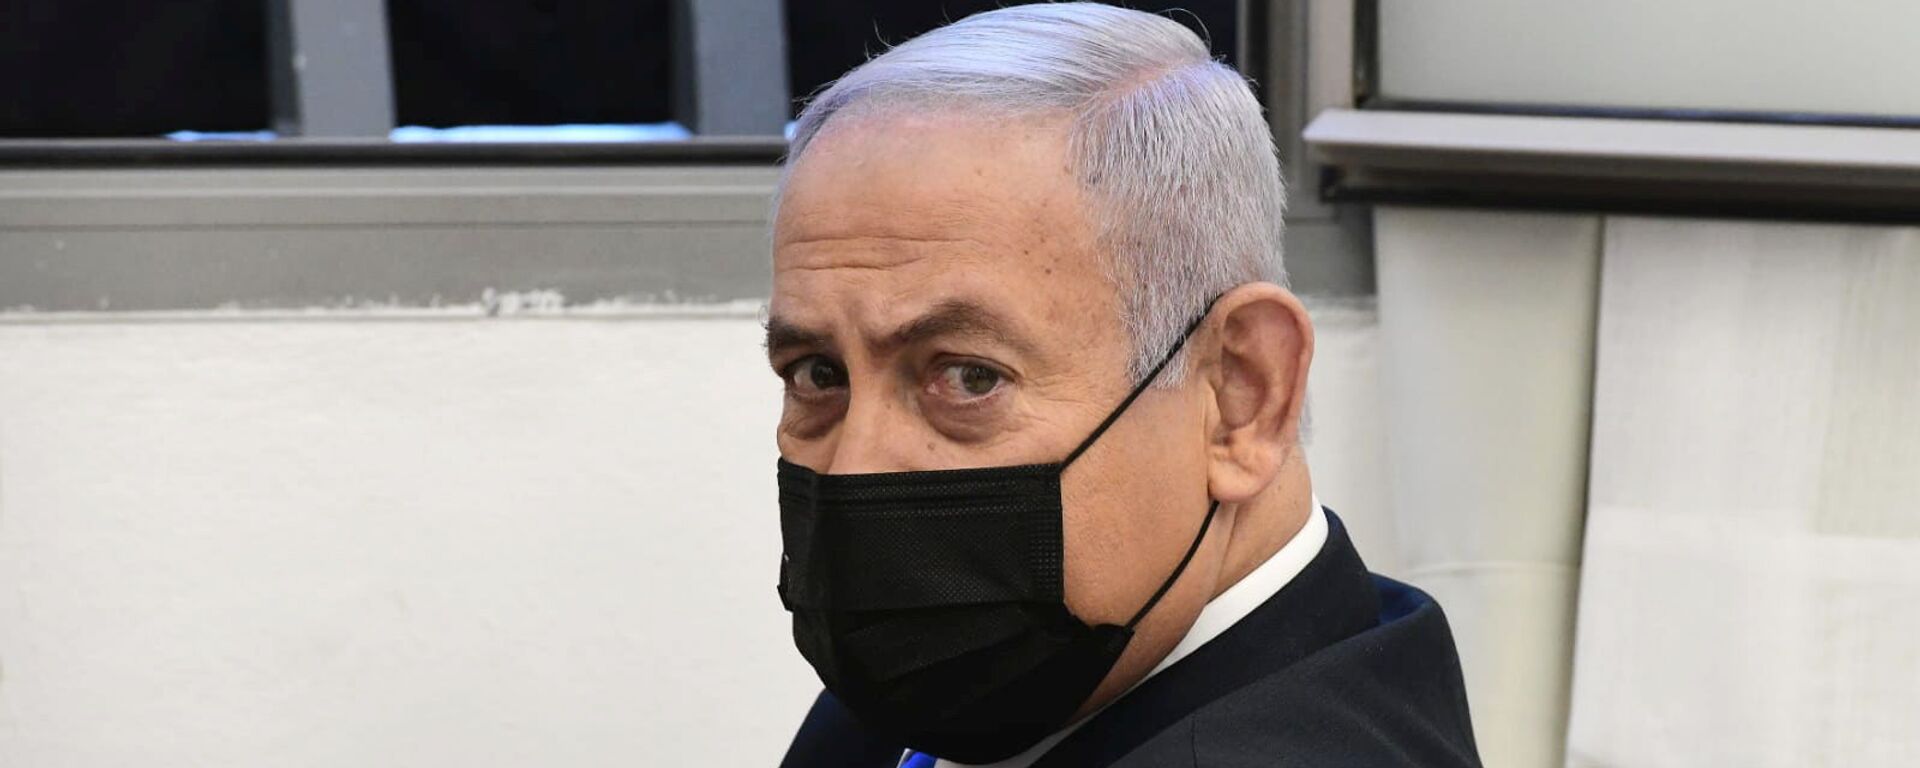 Israeli Prime Minister Benjamin Netanyahu looks on before the start of a hearing in his corruption trial at Jerusalem's District Court February 8, 2021. - Sputnik International, 1920, 23.02.2021